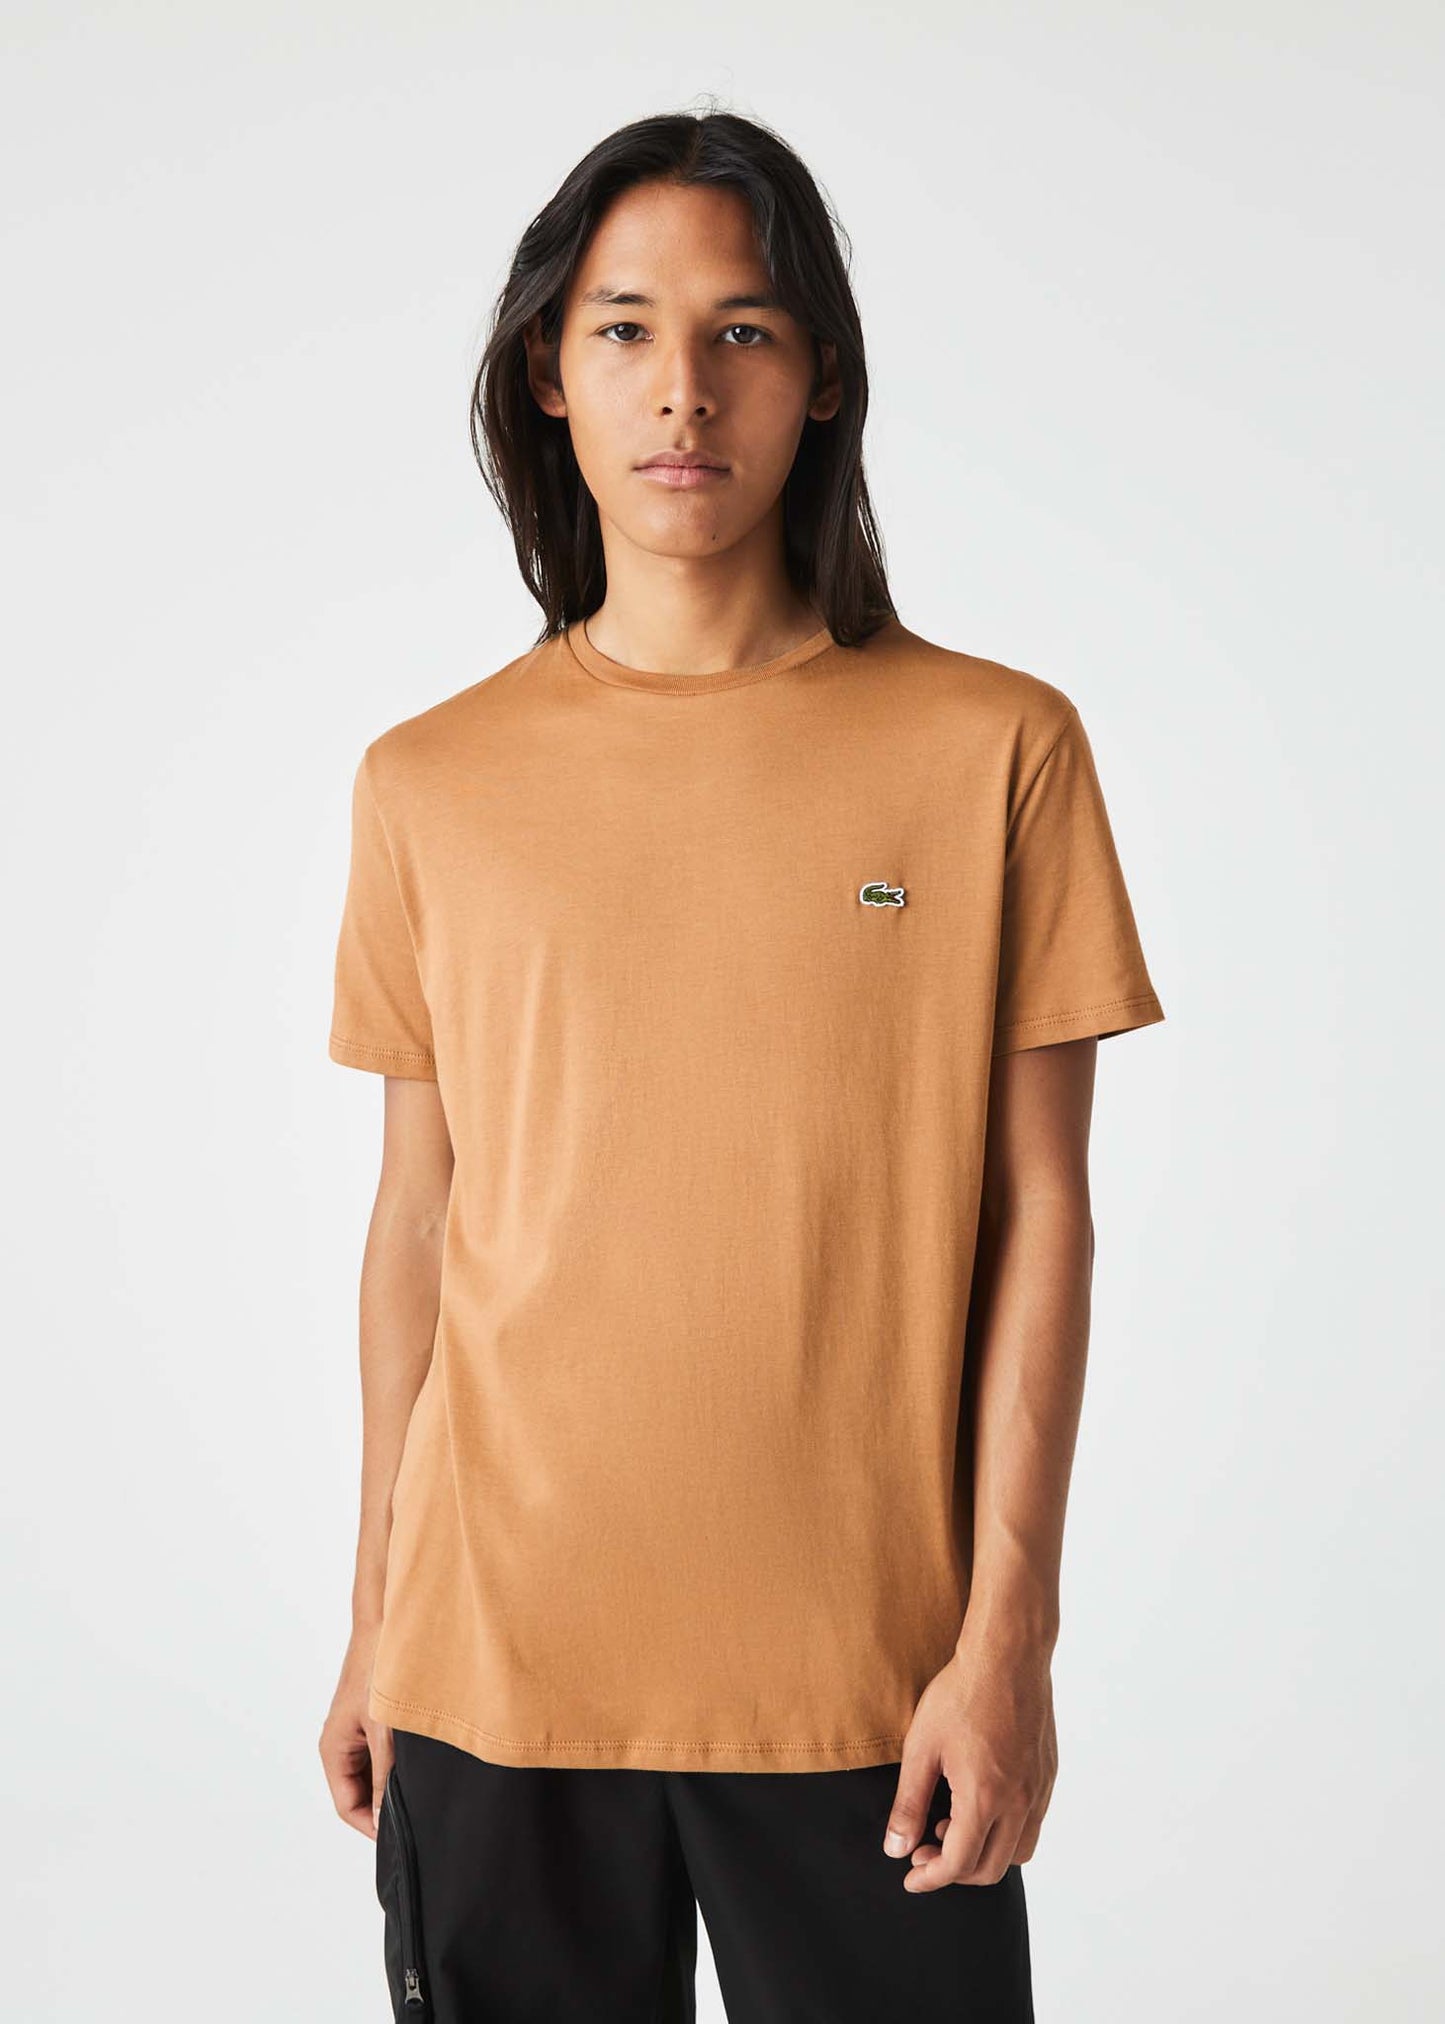 Lacoste t-shirt leafy brown